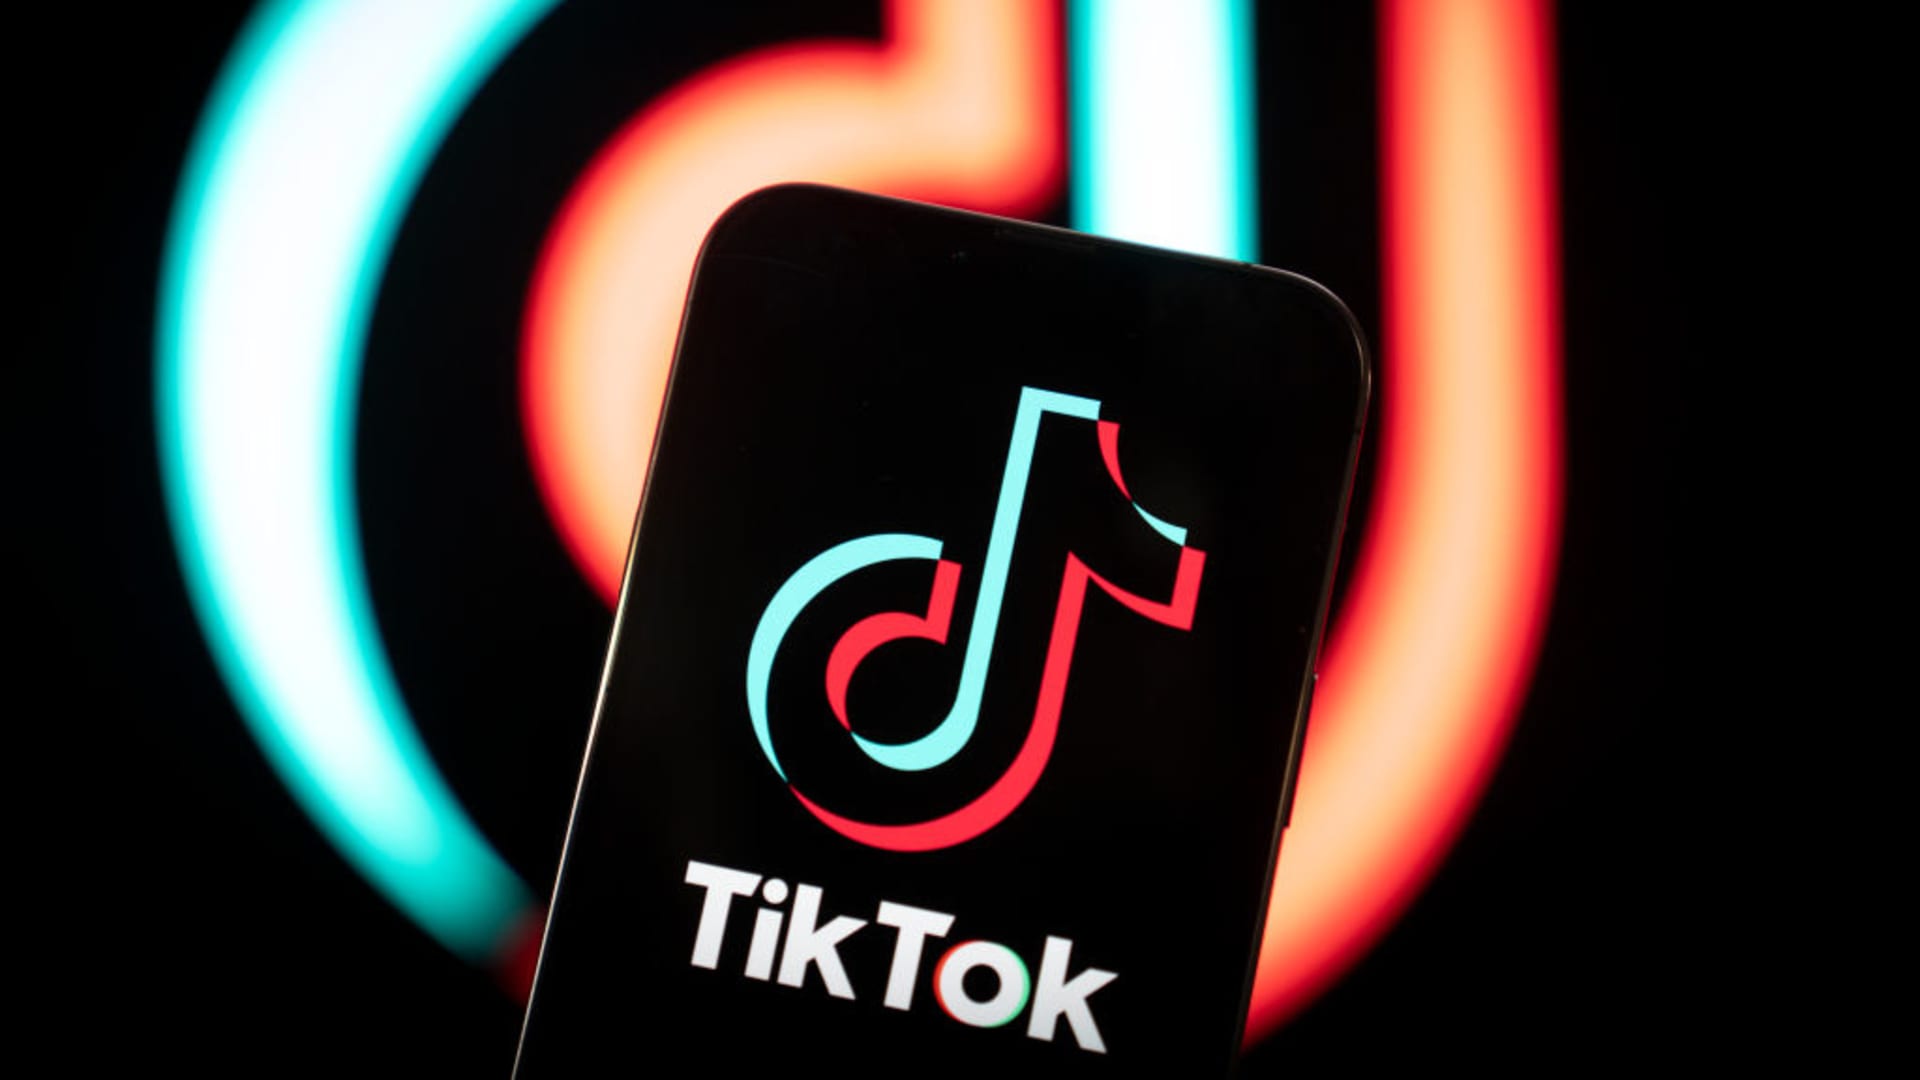 TikTok cuts about 60 jobs as January layoffs continue across tech industry